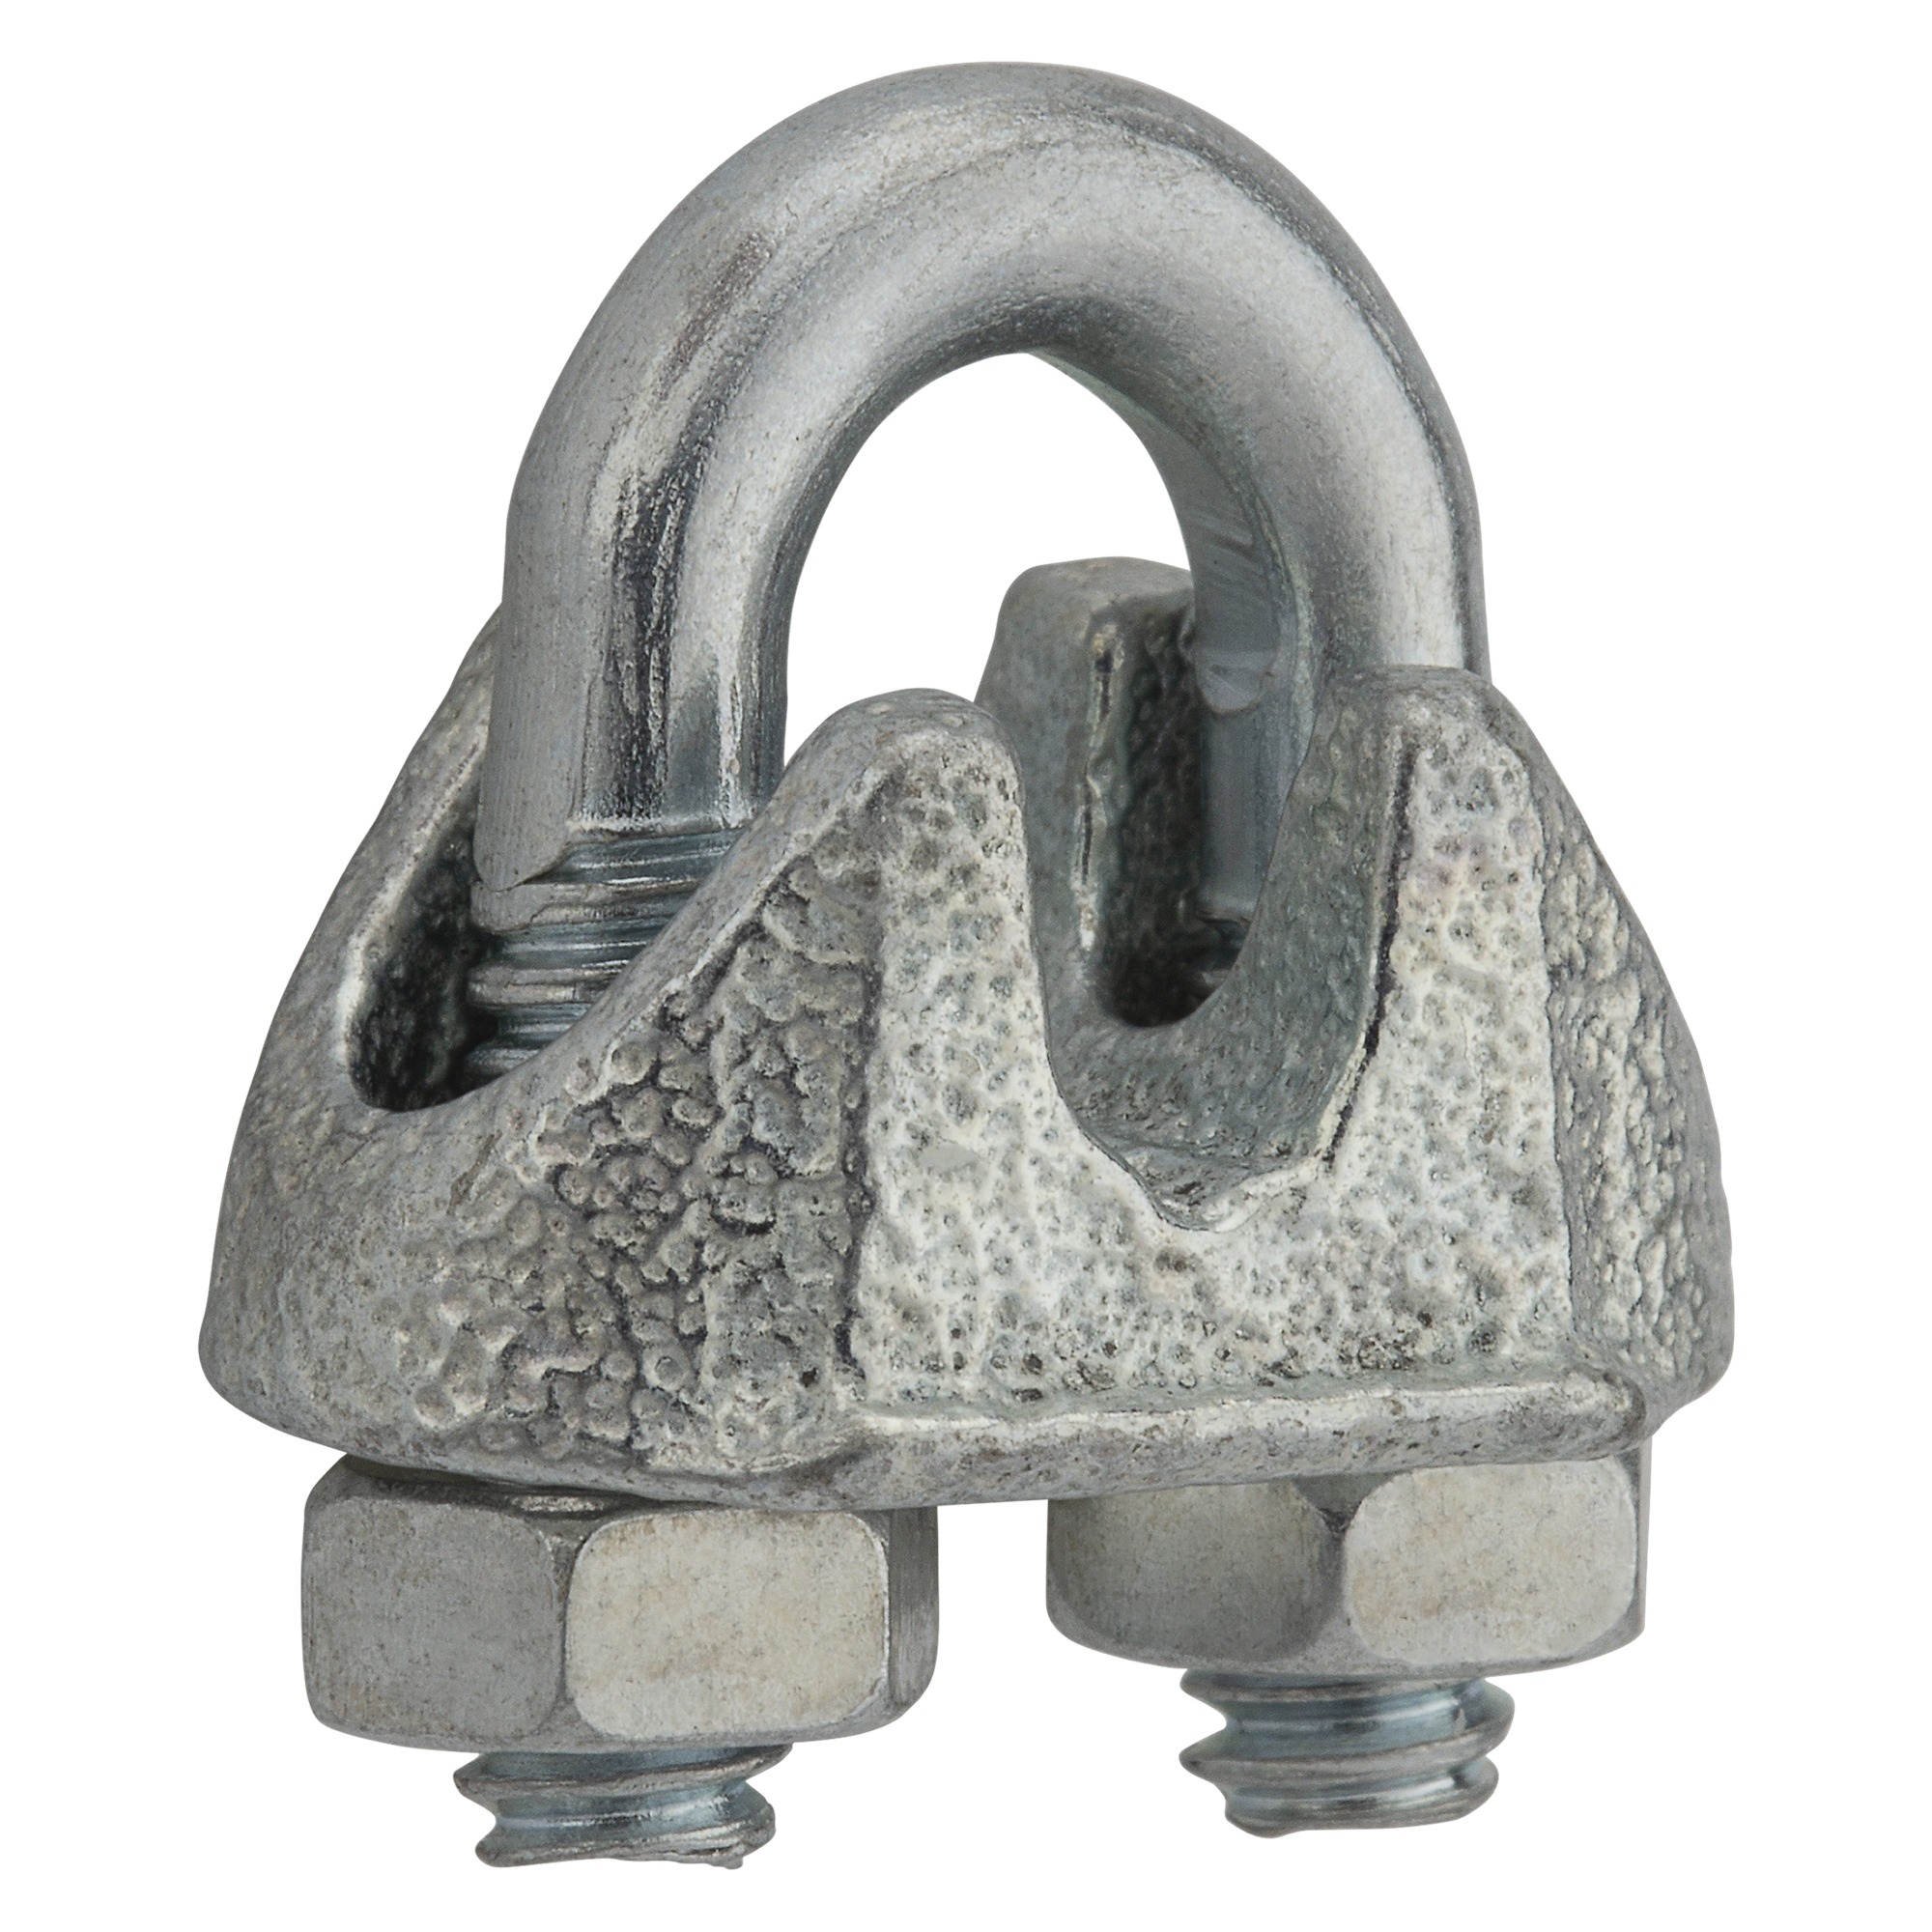 N889-013 Wire Cable Clamp, 1/8 in Dia Cable, 7/8 in L, Malleable Iron/Steel, Electro Galvanized/Zinc